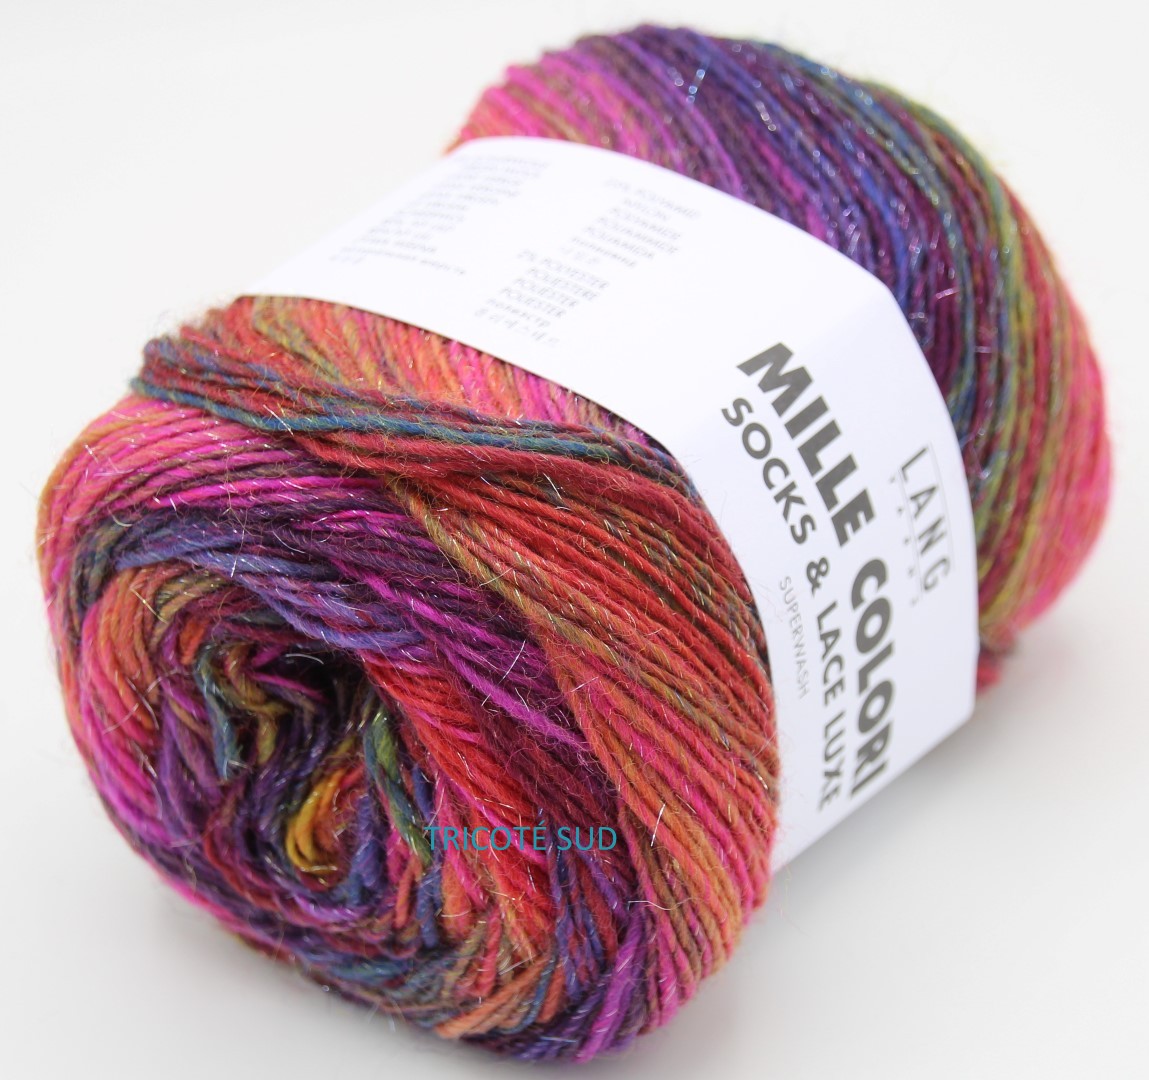 MILLE COLORI SOCKS AND LACE LUXE LANG YARNS COLORIS 206 (1) (Large)